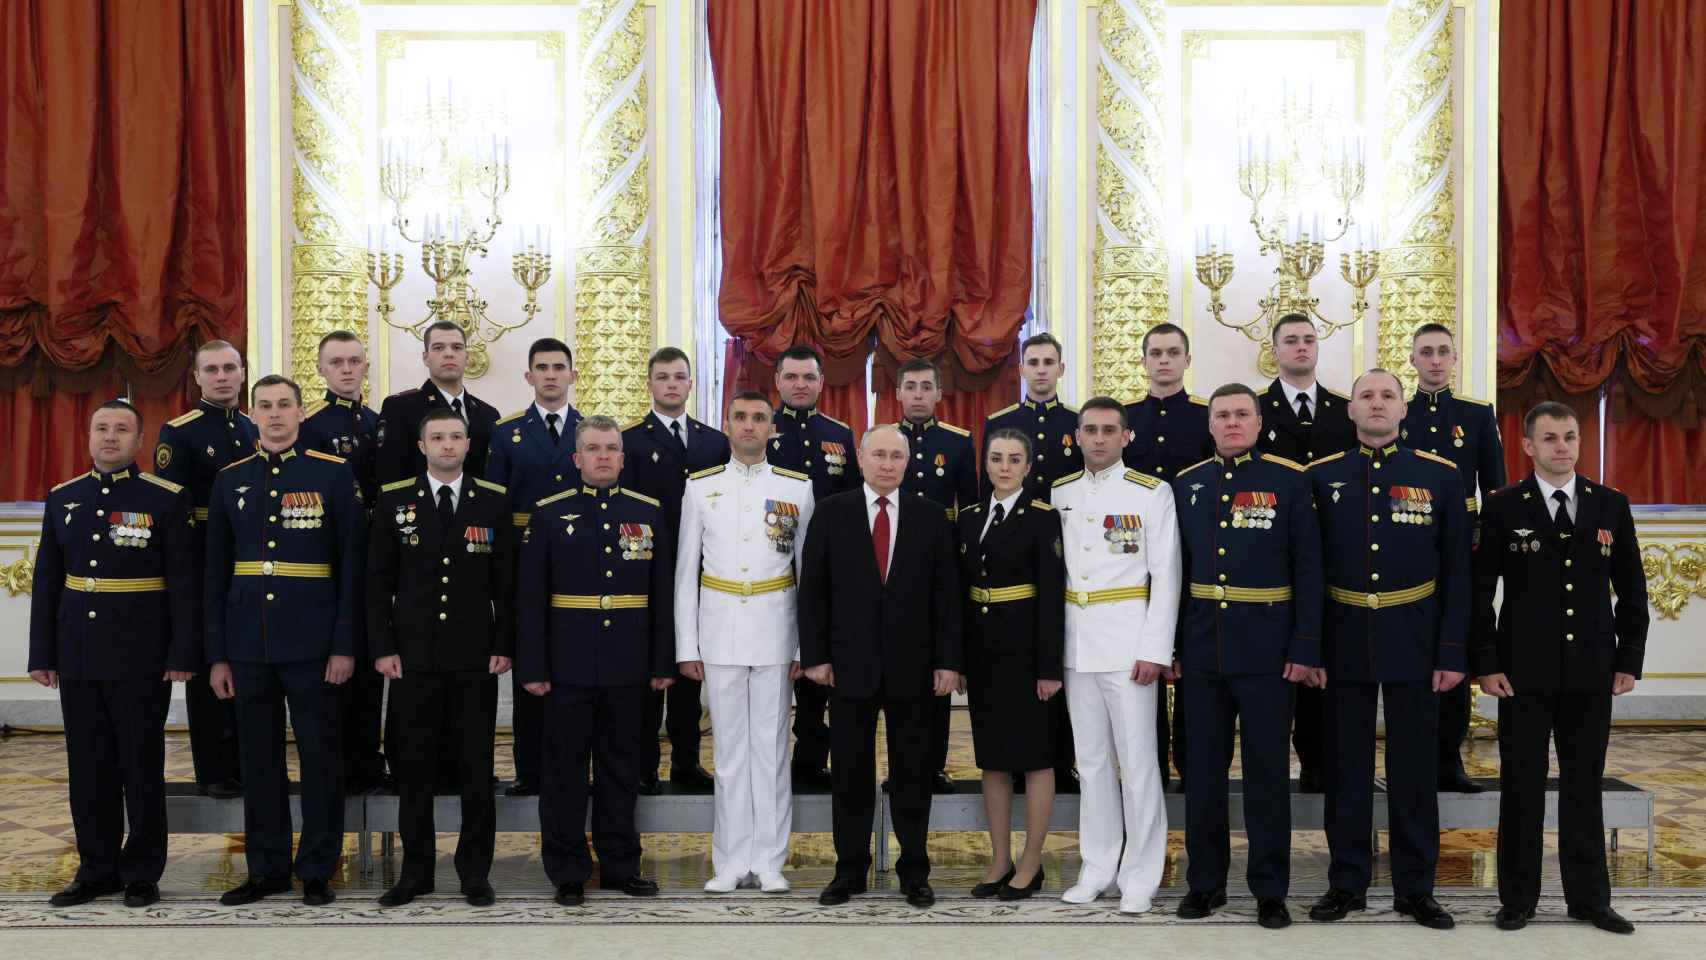 Vladimir Putin poses for a photo with graduates of Russia's military institutions of higher education during a meeting in the Kremlin.